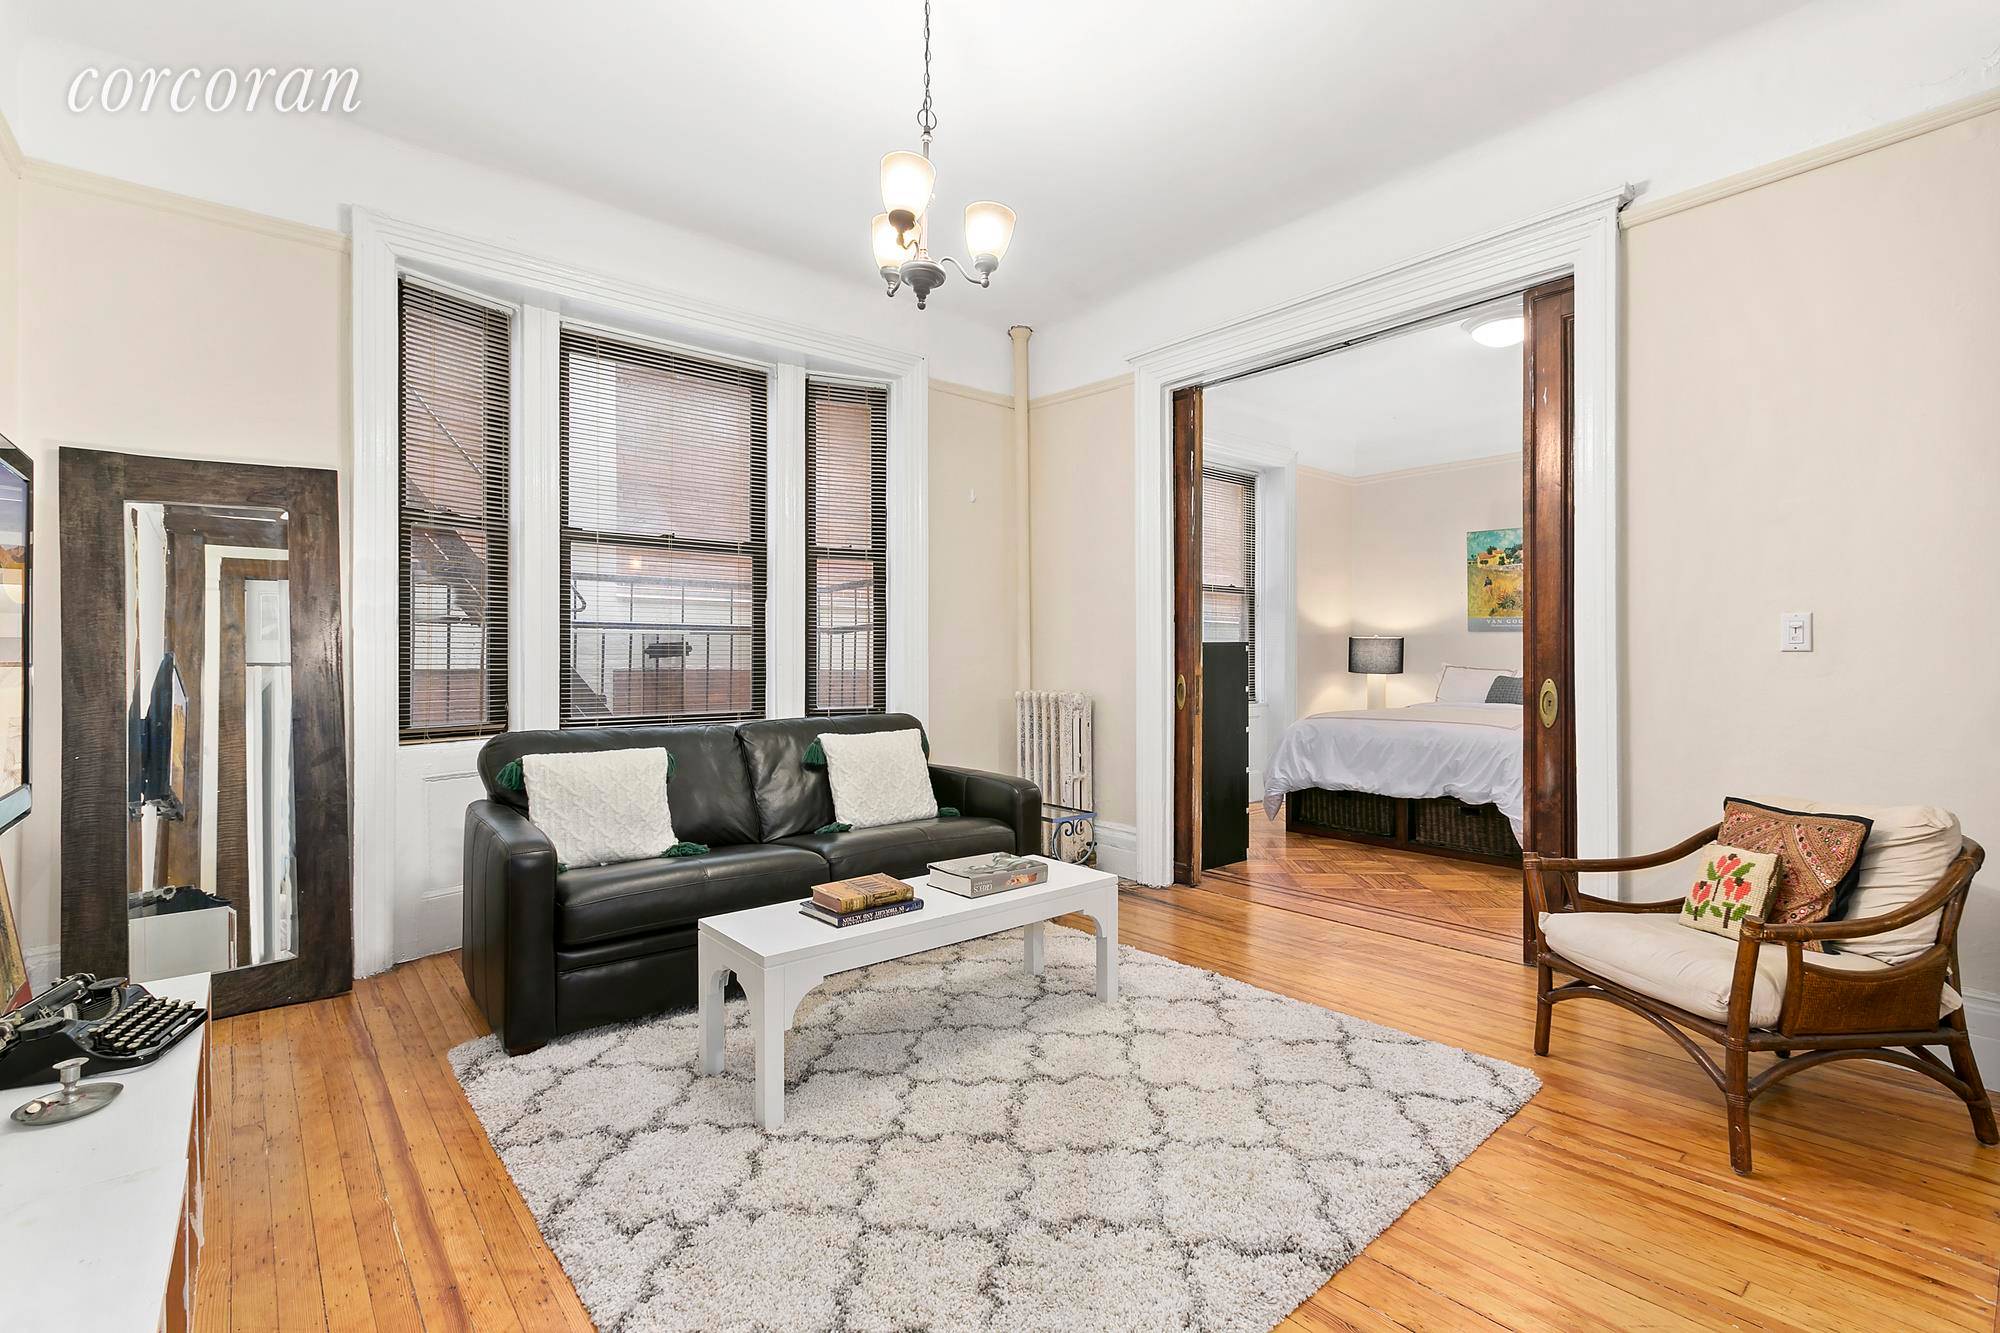 Artfully renovated Classic Pre war 2 Bed, 1 Bath, with high ceilings, over sized windows in every room and hardwood floors throughout.